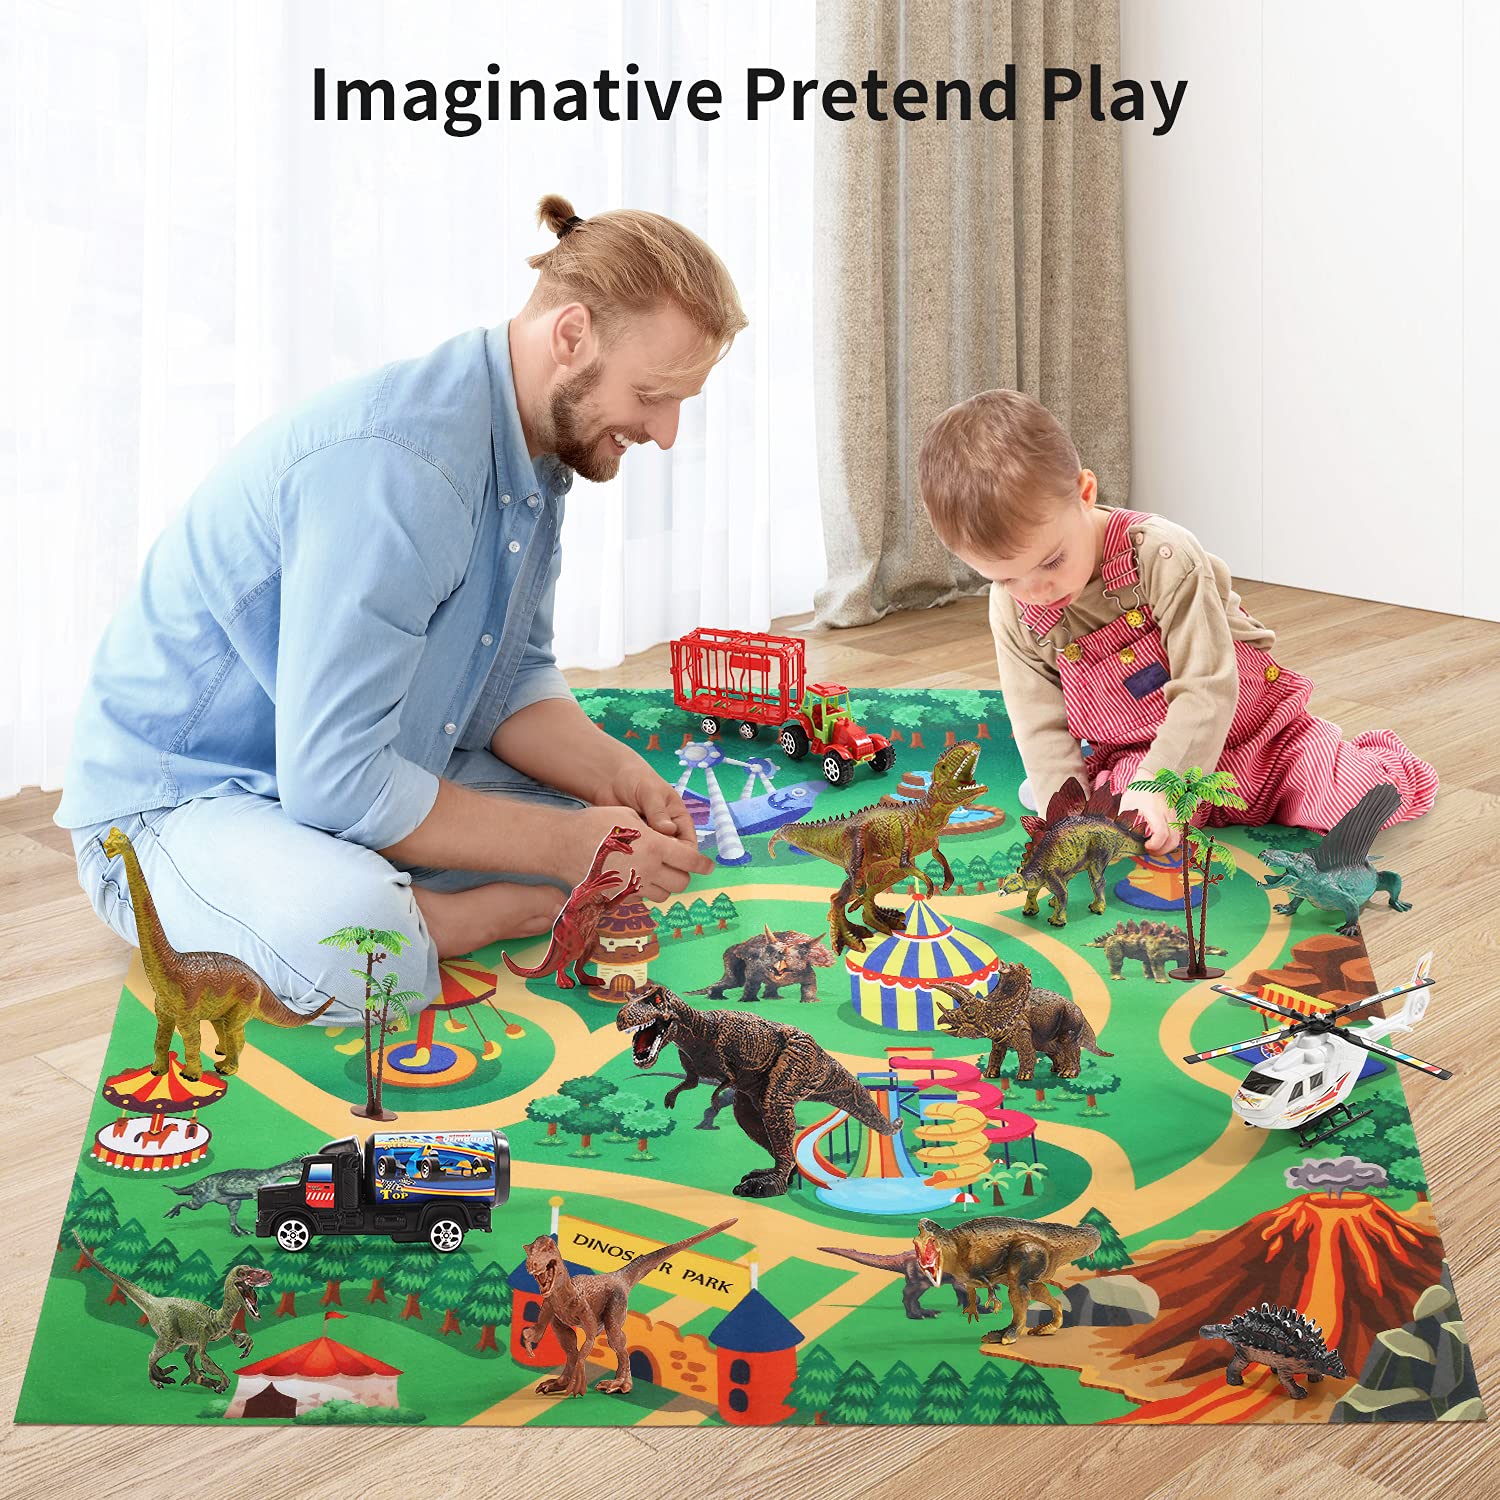 CUTE STONE 46Pcs Dinosaur Toy Playset w/ Activity Play Mat, Realistic Dinosaur Figure Toys w/3 Vehicles to Create a Dino World Including T-Rex, Triceratops, Velociraptor, Kids Perfect Educational Gift